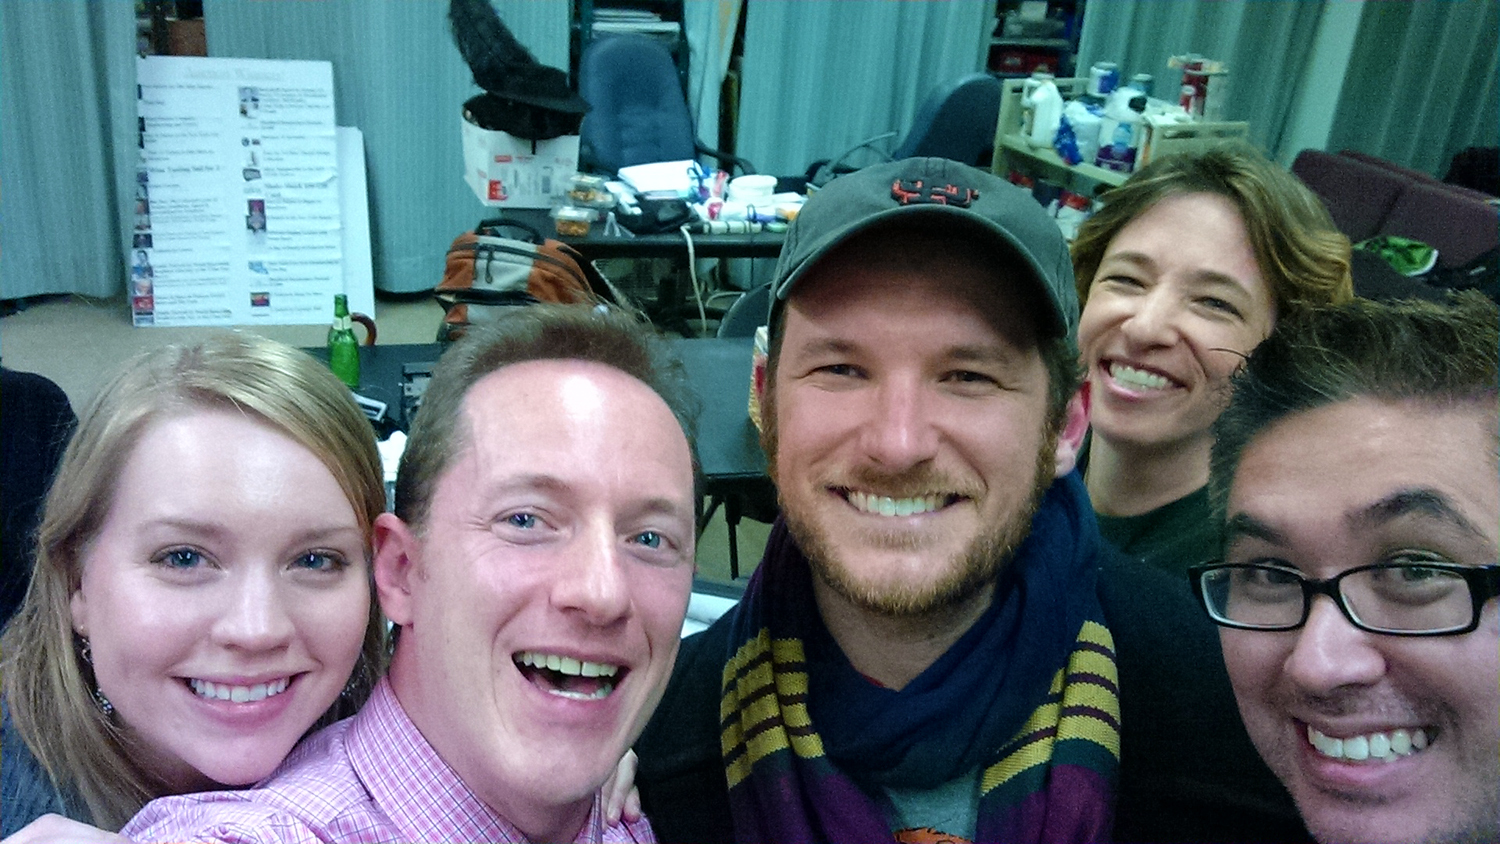  Backstage at TUNE IN TIME (the musical theatre game show), with (from l. to r.)     Britt Bonney  , Tom,   Drew Gasparini  ,   Amy Engelhardt   and   Erik Przytulski  .   